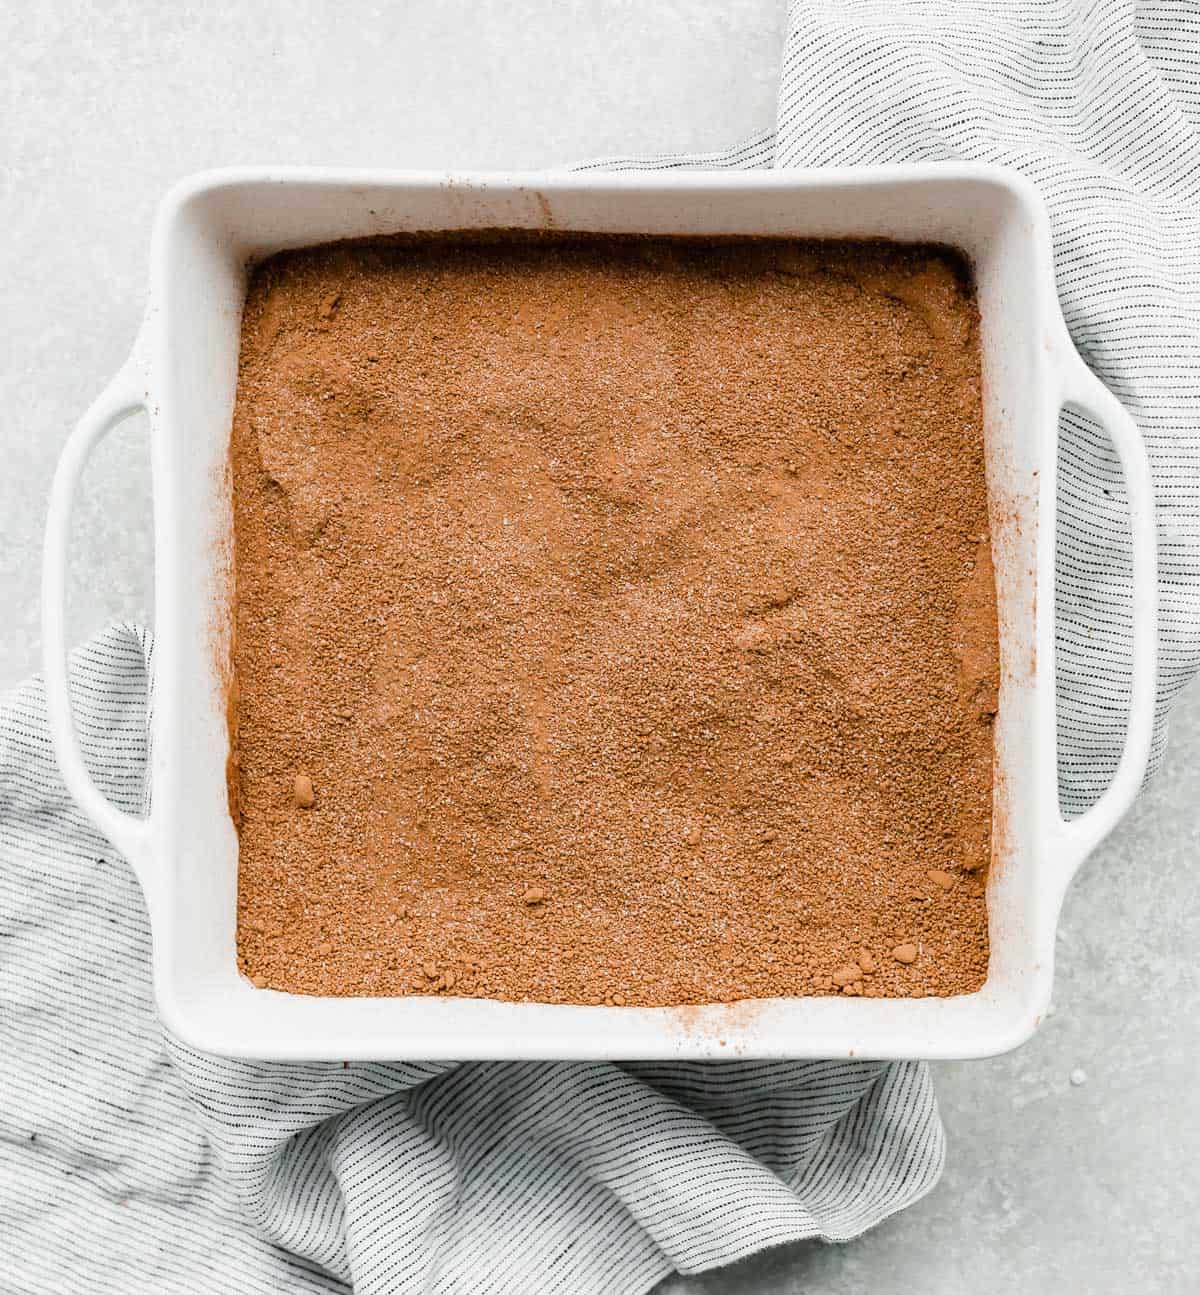 A brown colored sugar mixture overtop a hot fudge cake batter in a white square pan.